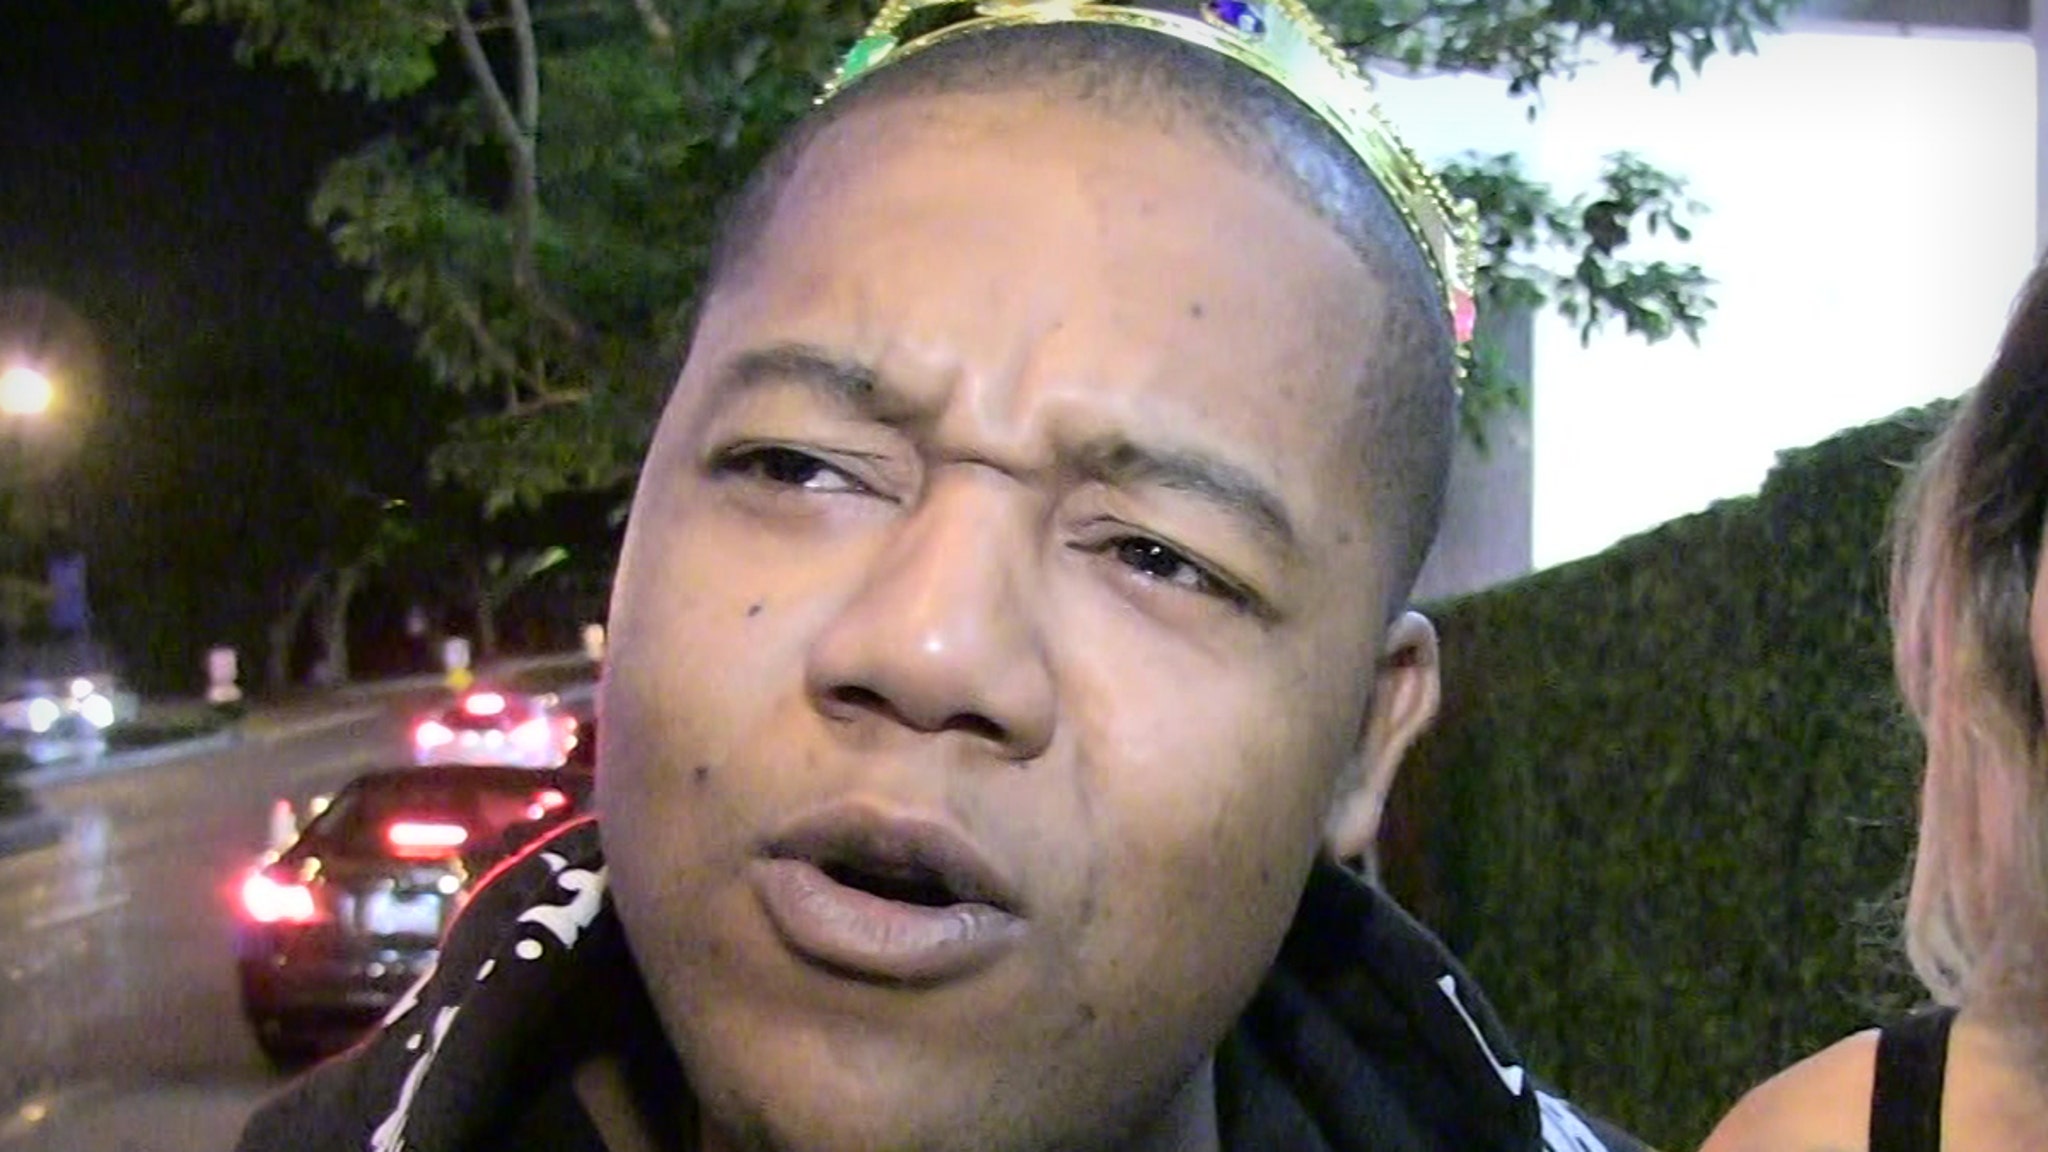 Former Disney Star Kyle Massey Charged with Felony Immoral Communication with A Minor